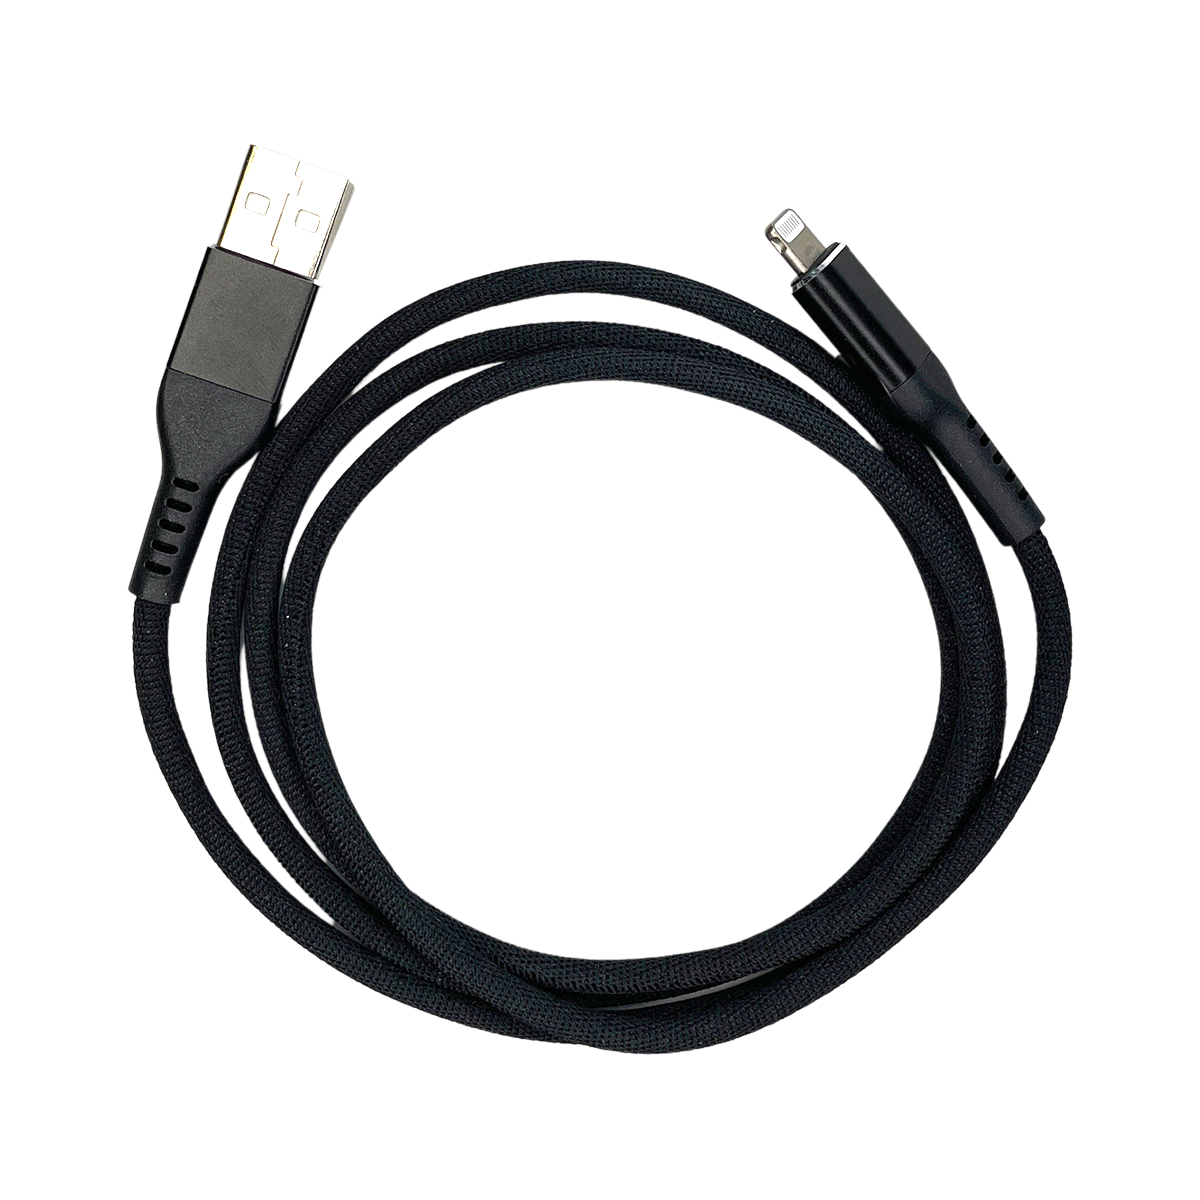 USB-A to Lighting Cable - MFI Certified - Braided - 3 Ft - Black